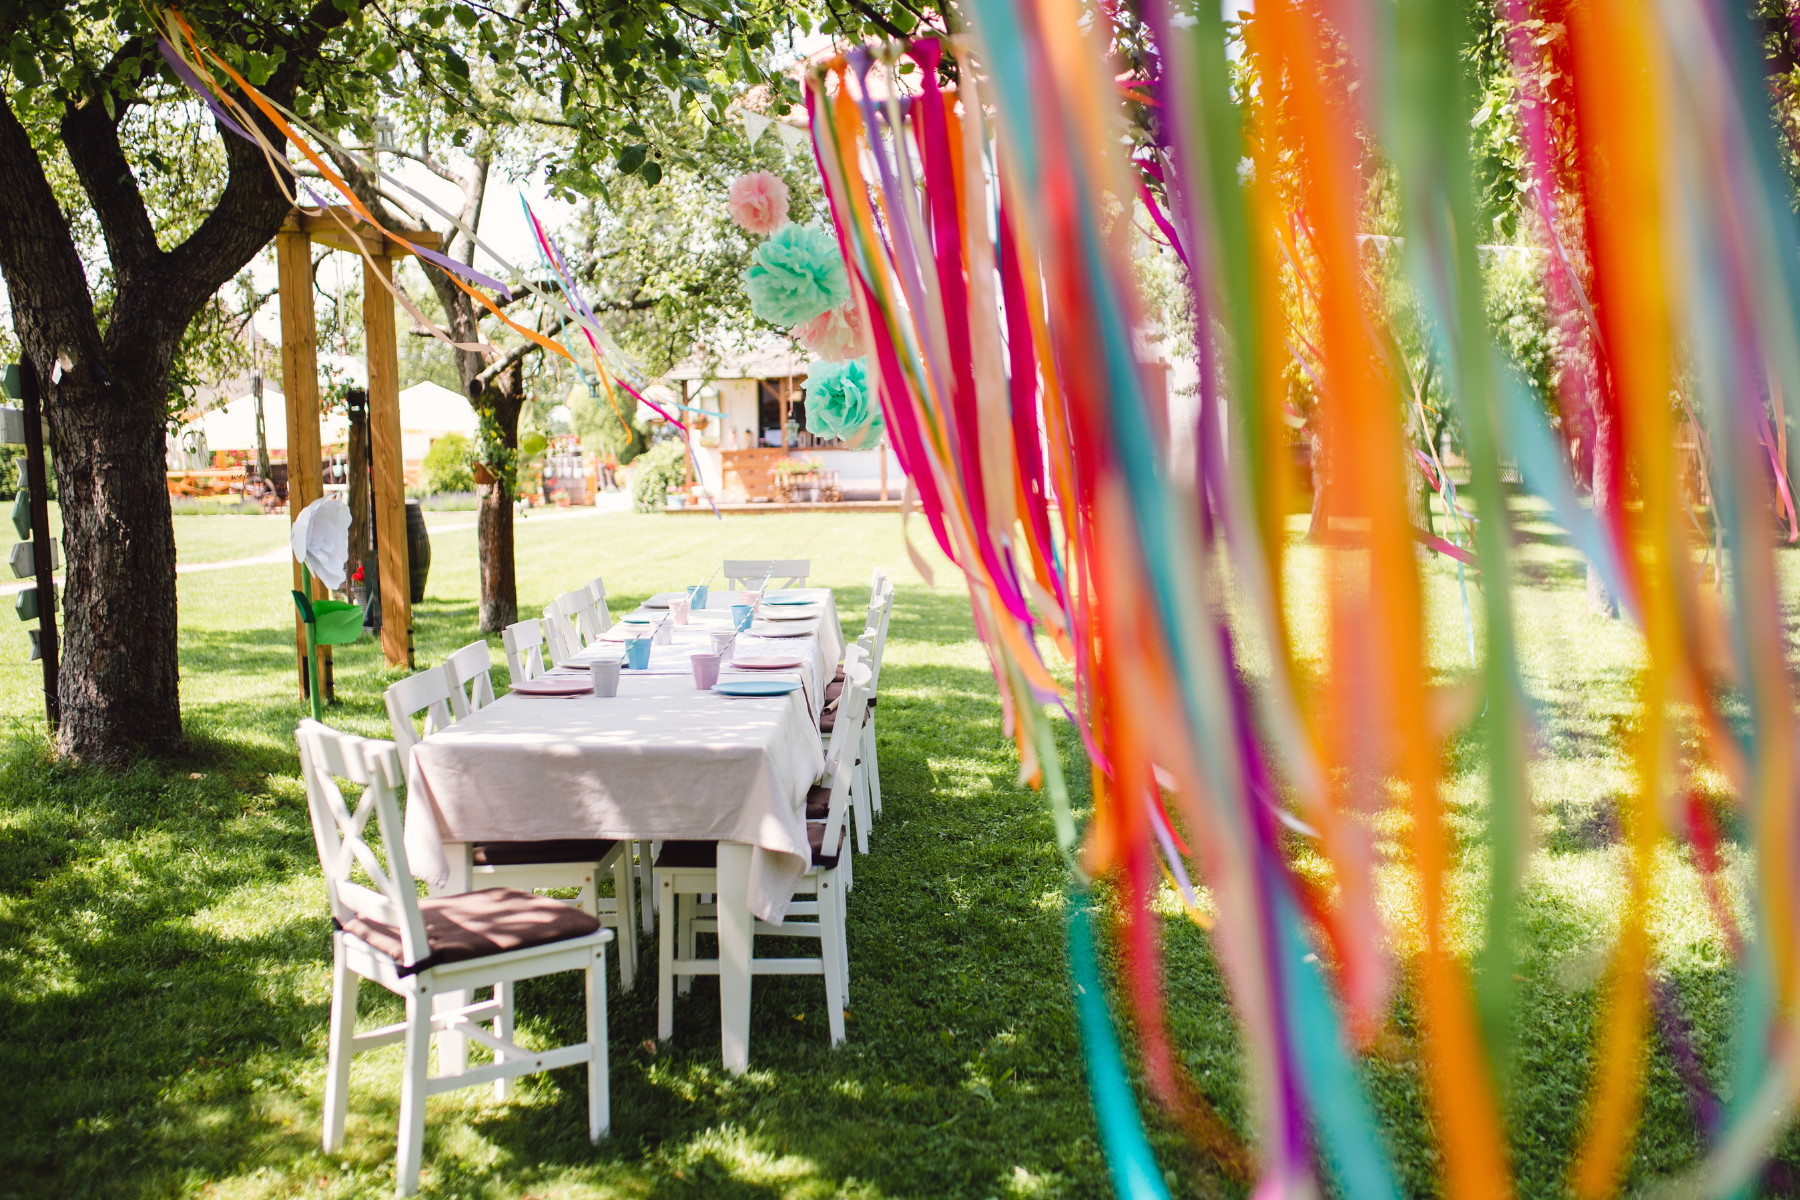 How to Decide Between Hosting a Party at Home or a Venue